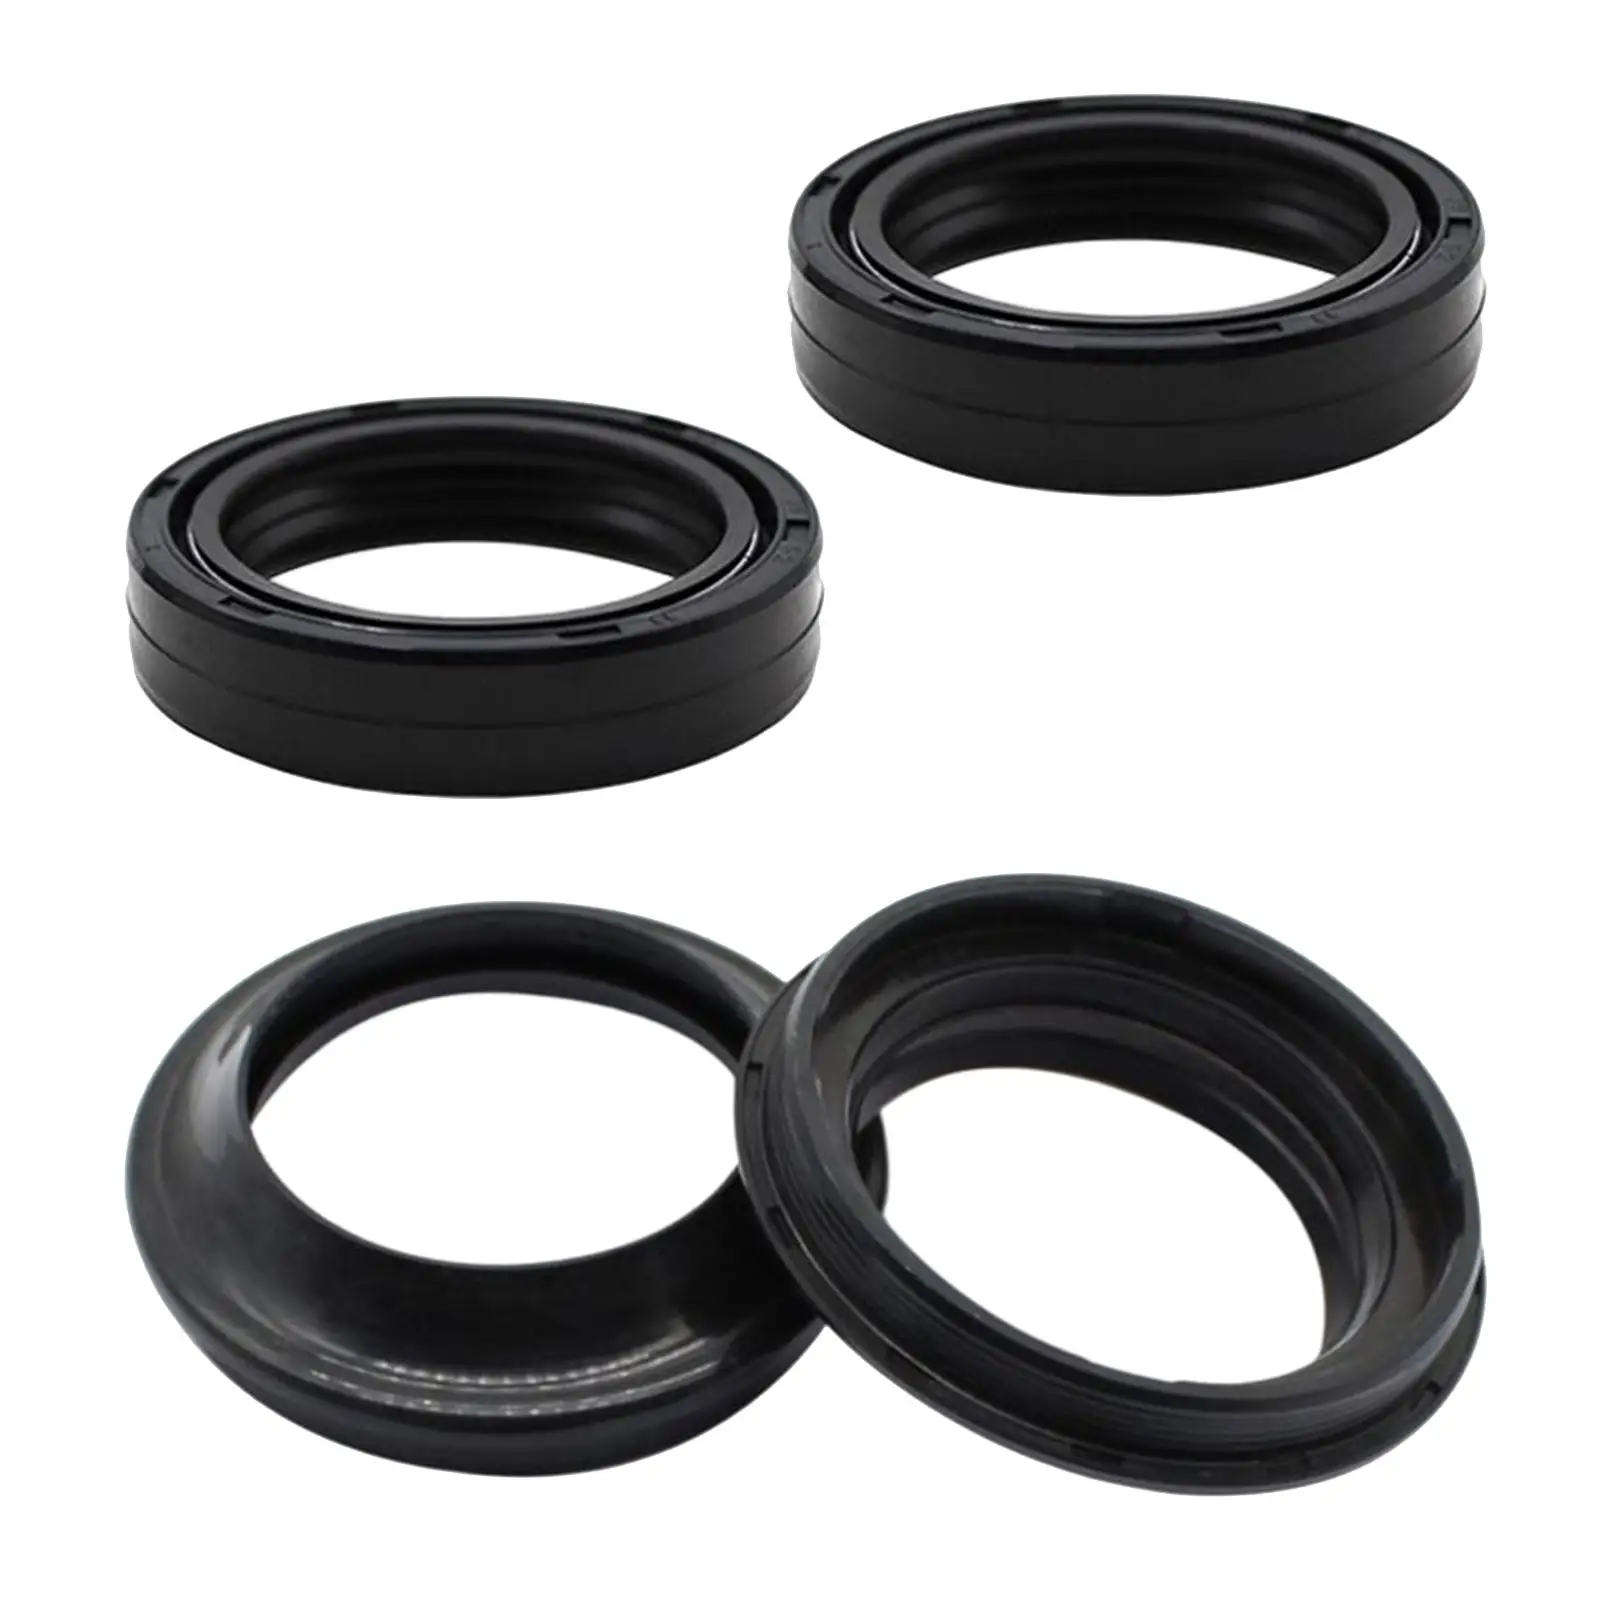 

Front Fork Shock Oil Seal and Dust Seal Set for Suzuki Rm-Z450 Dr-Z400 Dr-Z400E